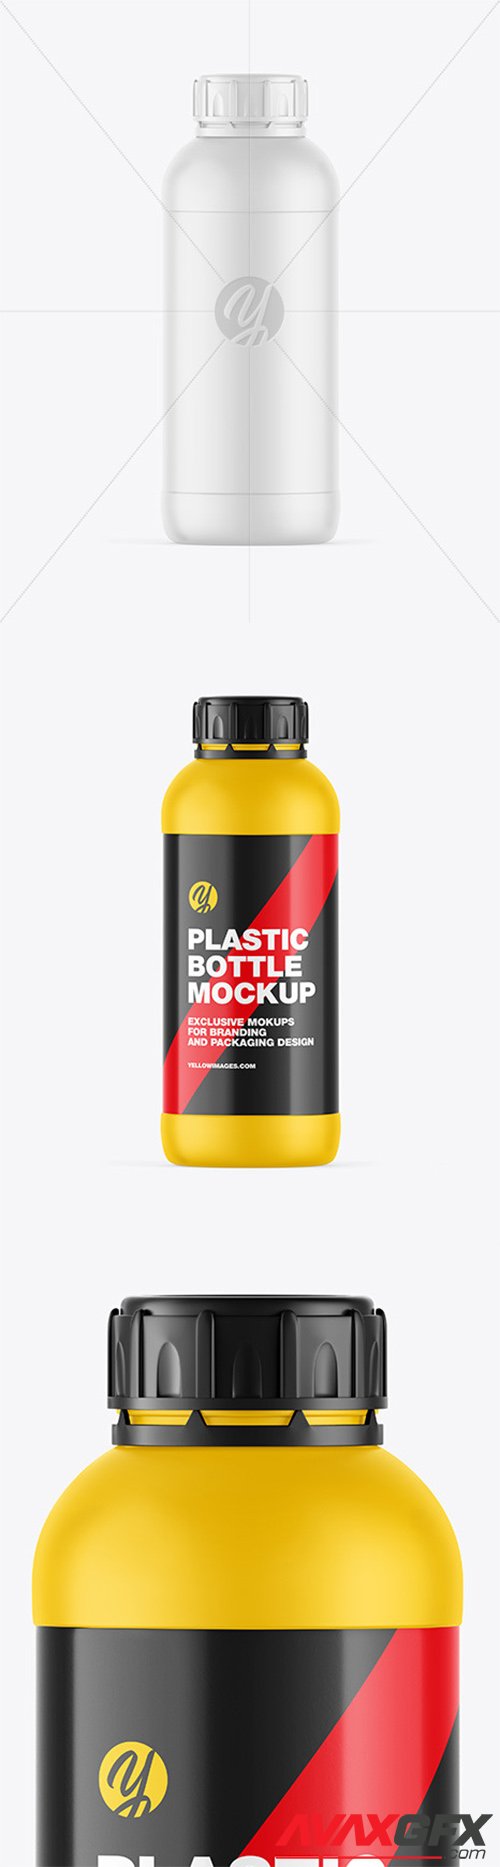 Matte Plastic Bottle Mockup 66467 » AVAXGFX - All Downloads that You